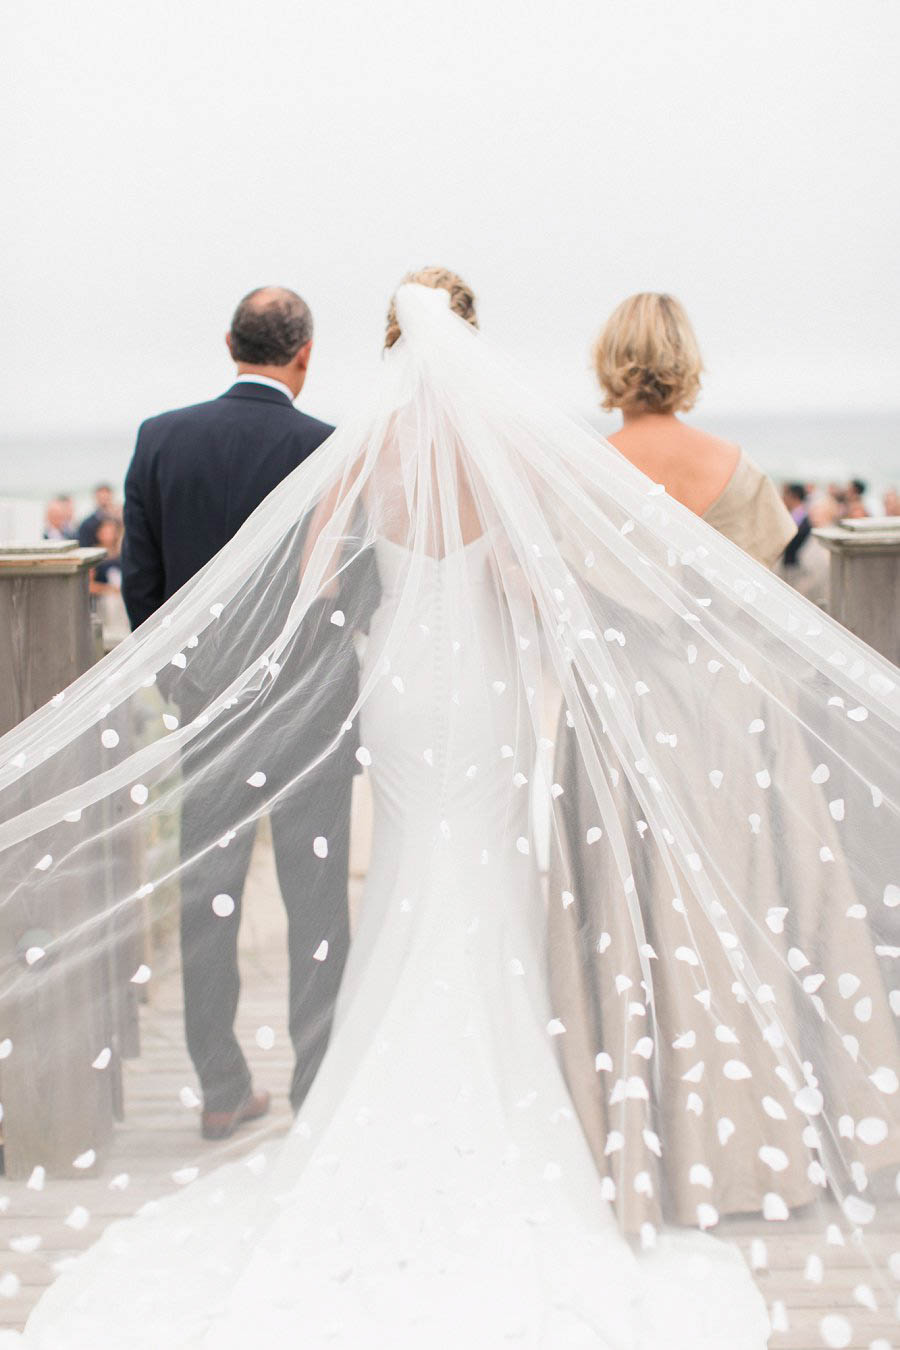 Bride walks down aisle at Hamptons beach wedding in photo by NYC photographer Amy Rizzuto.